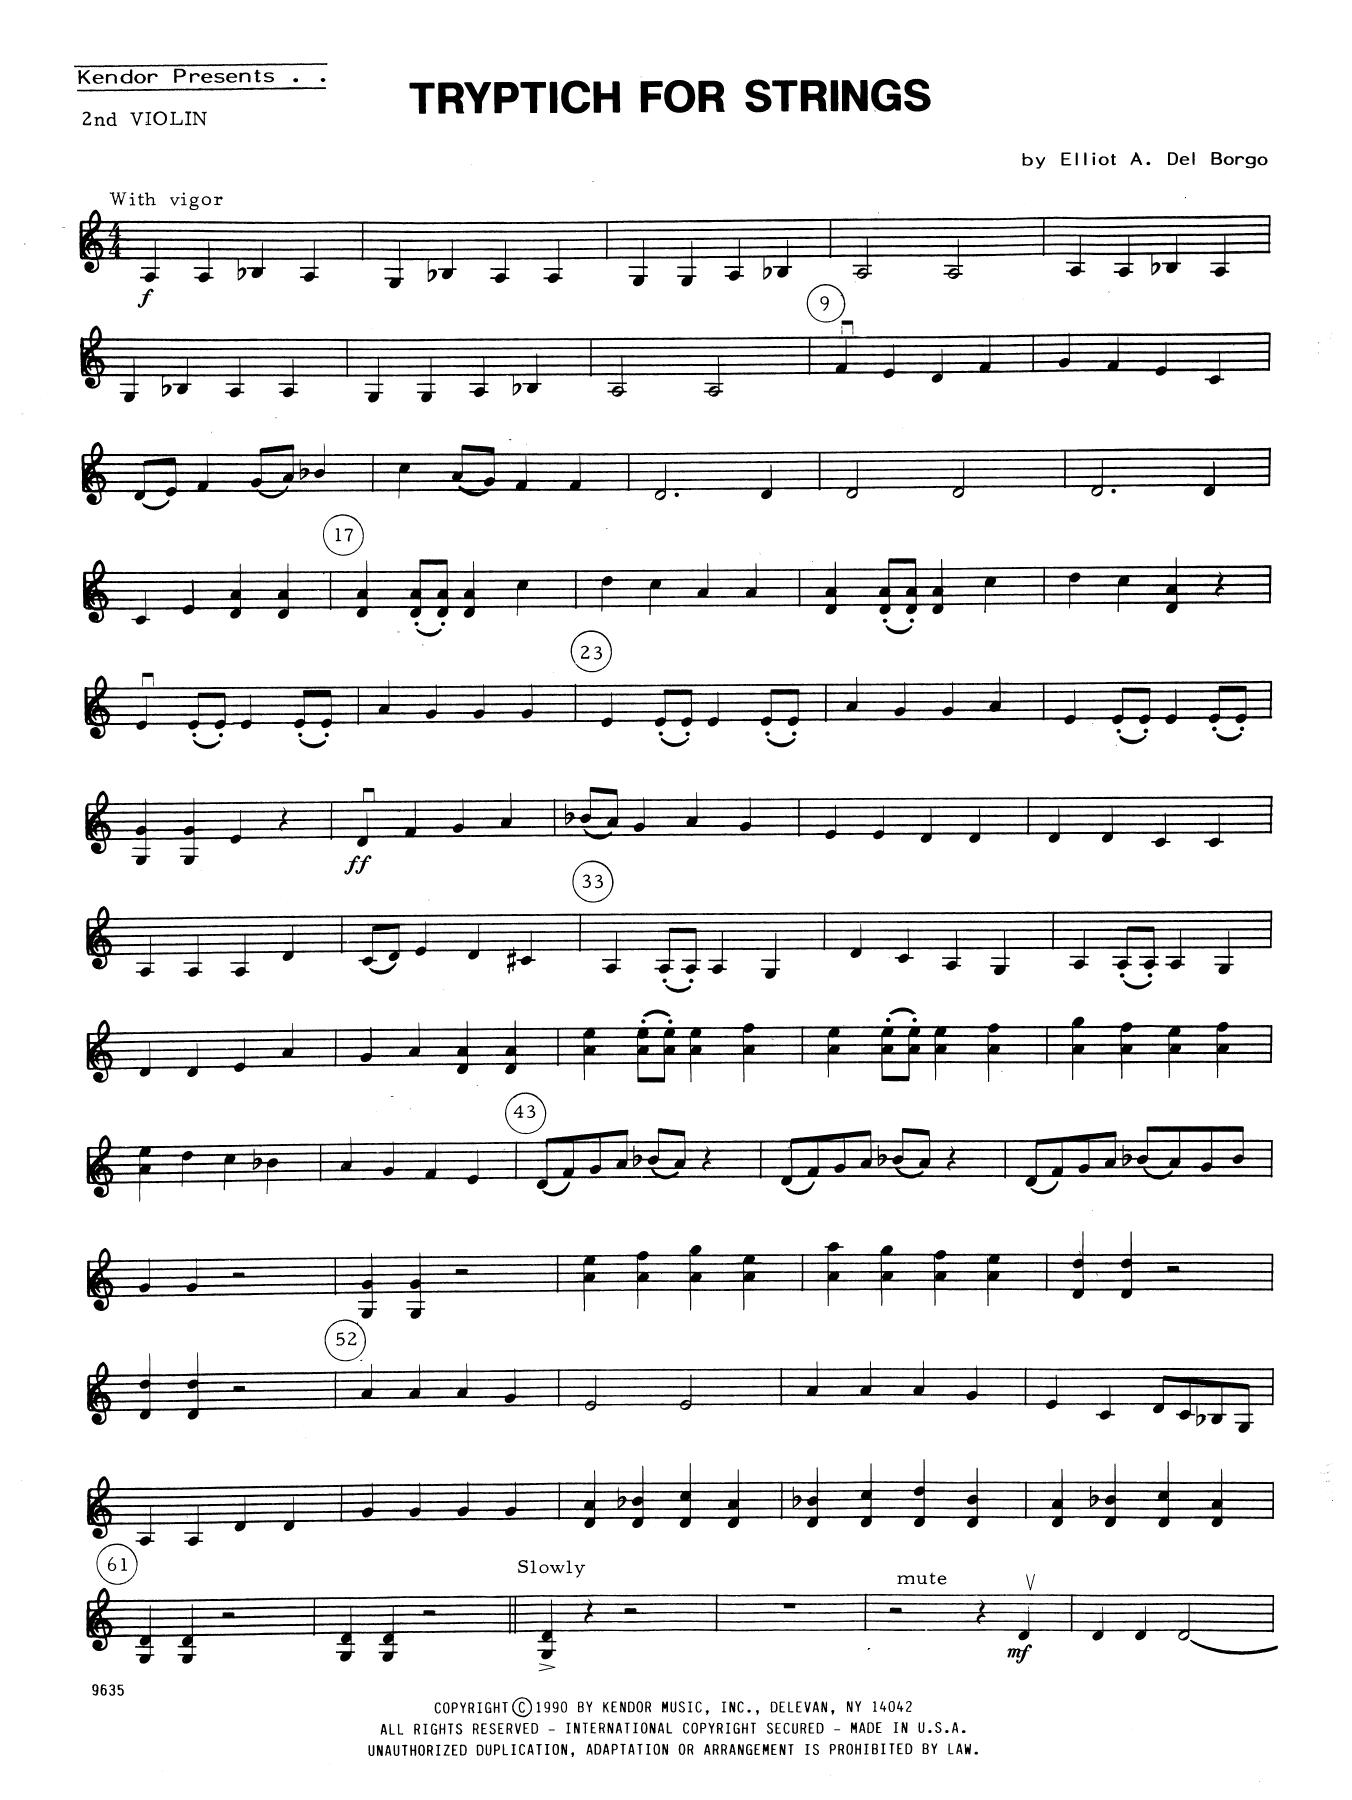 Download Elliot A. Del Borgo Tryptich For Strings - 2nd Violin Sheet Music